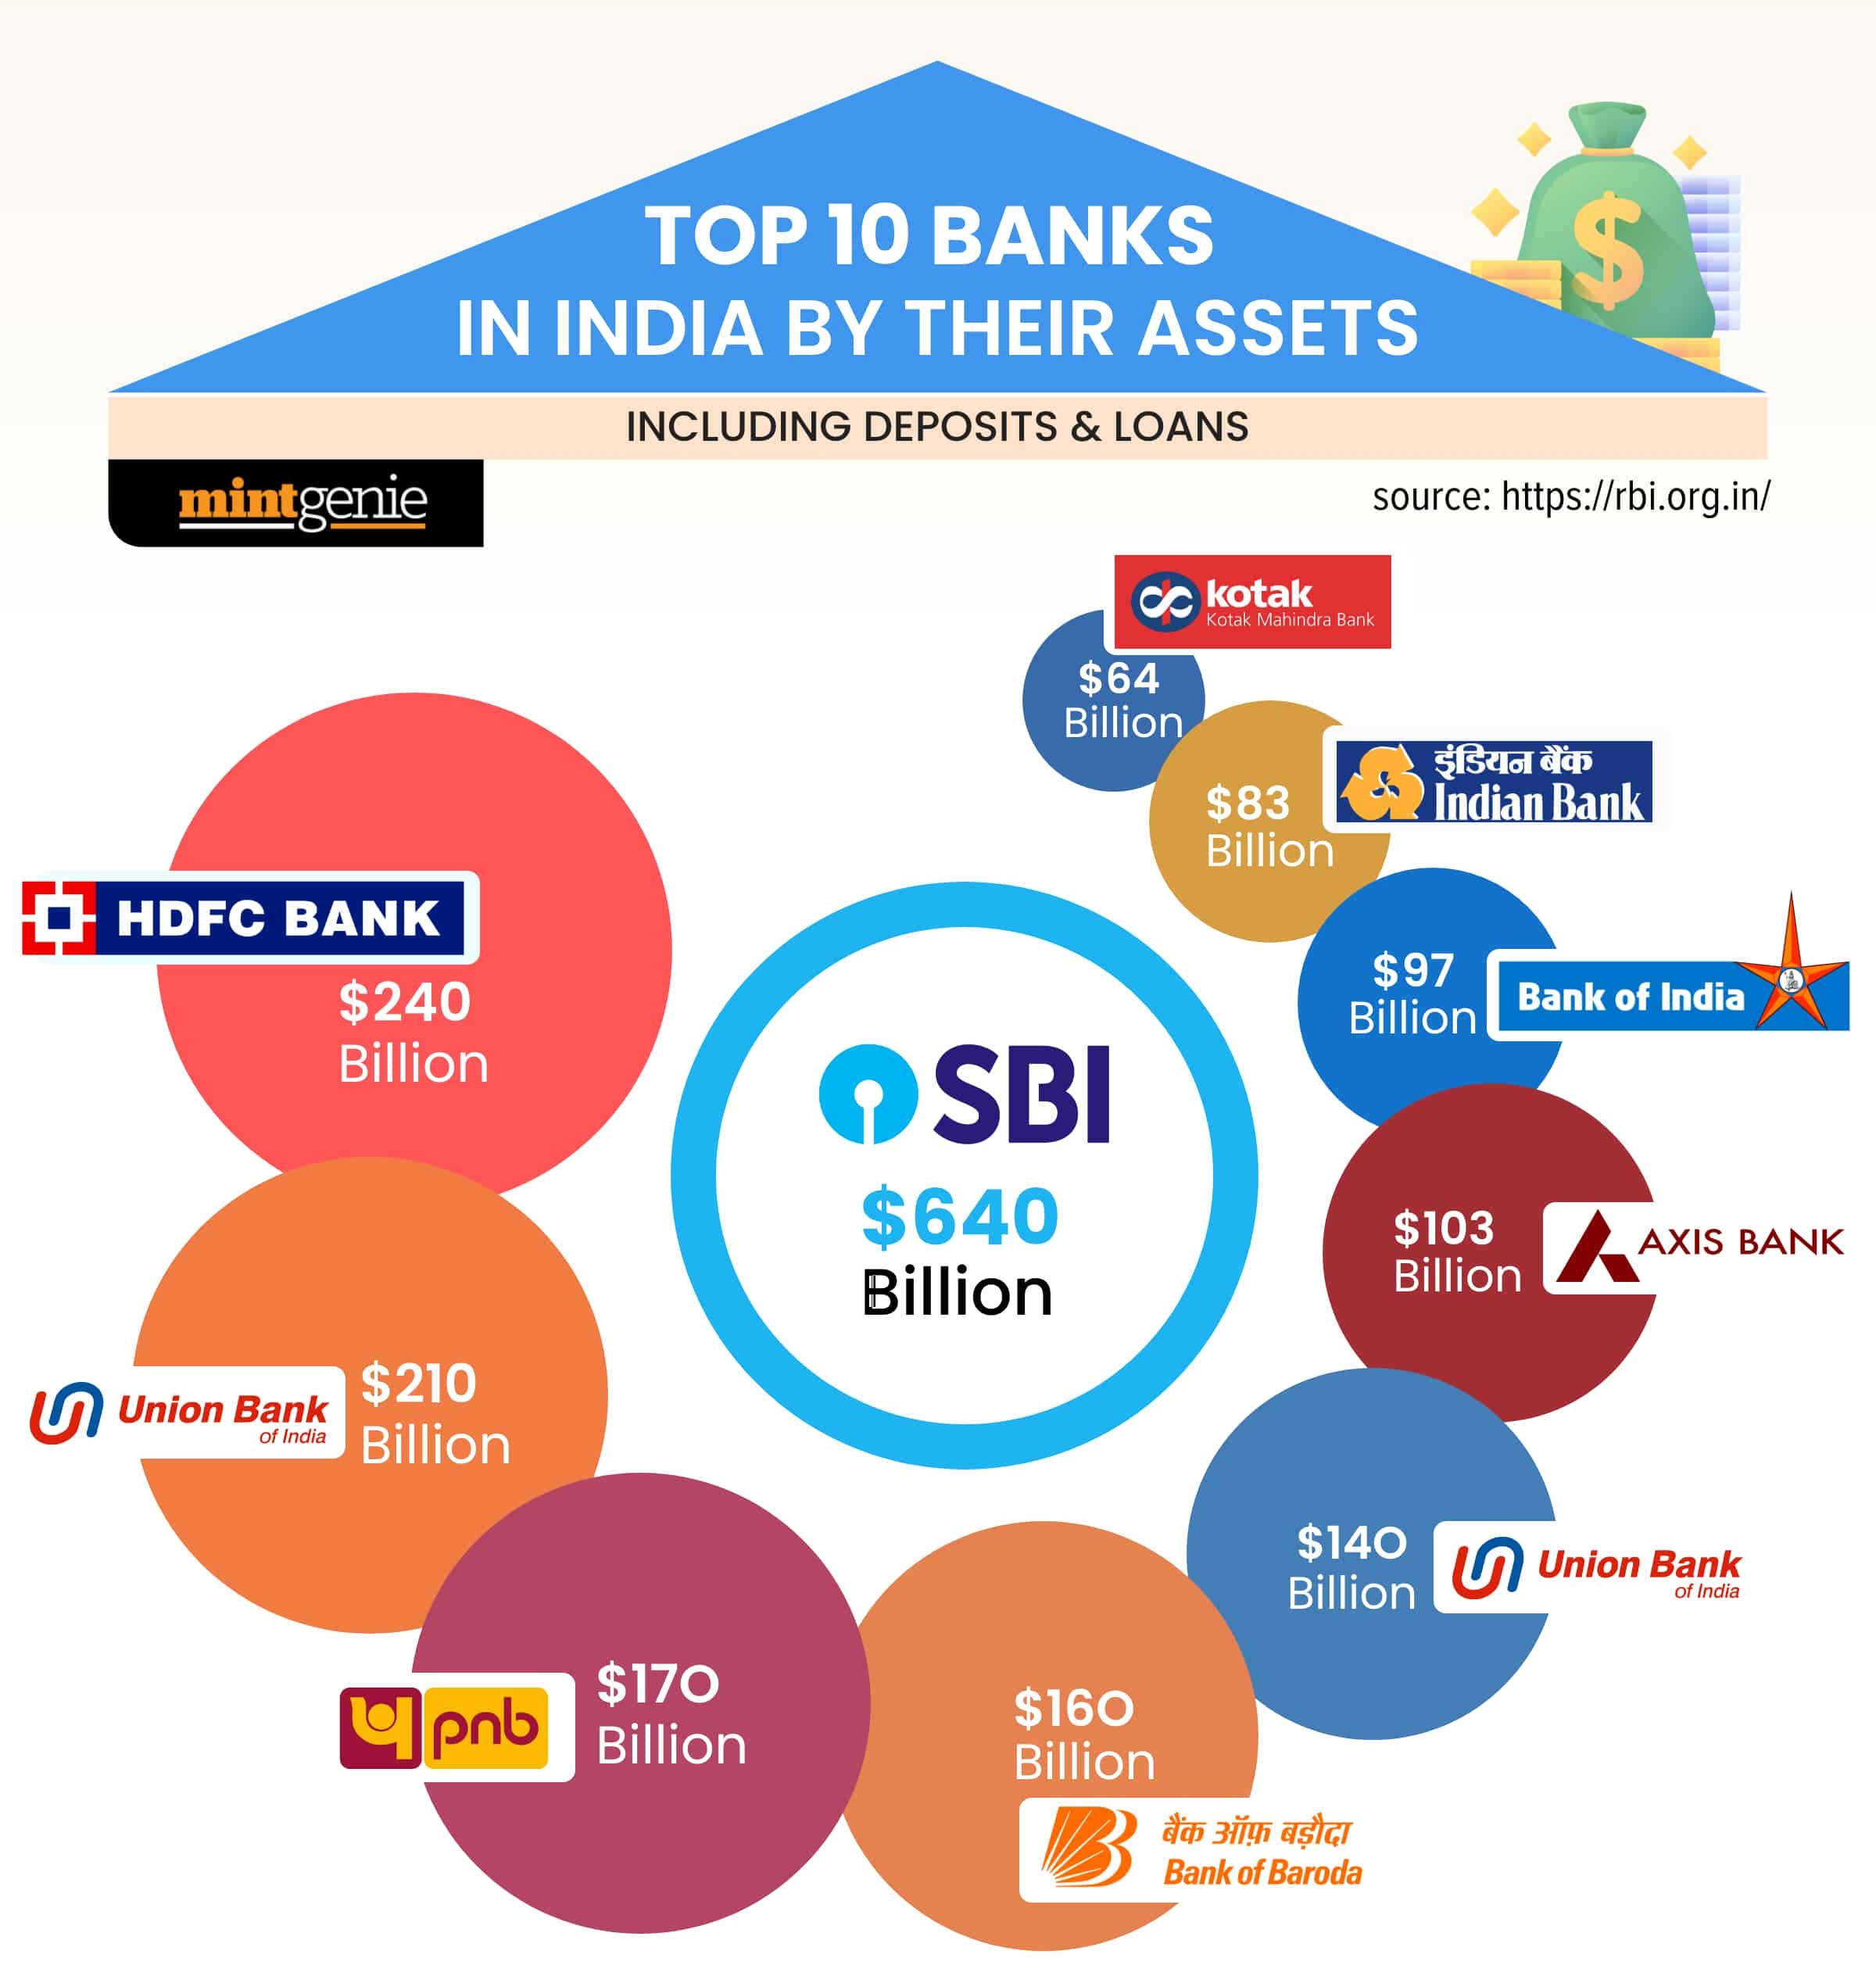 Top 10 banks in India